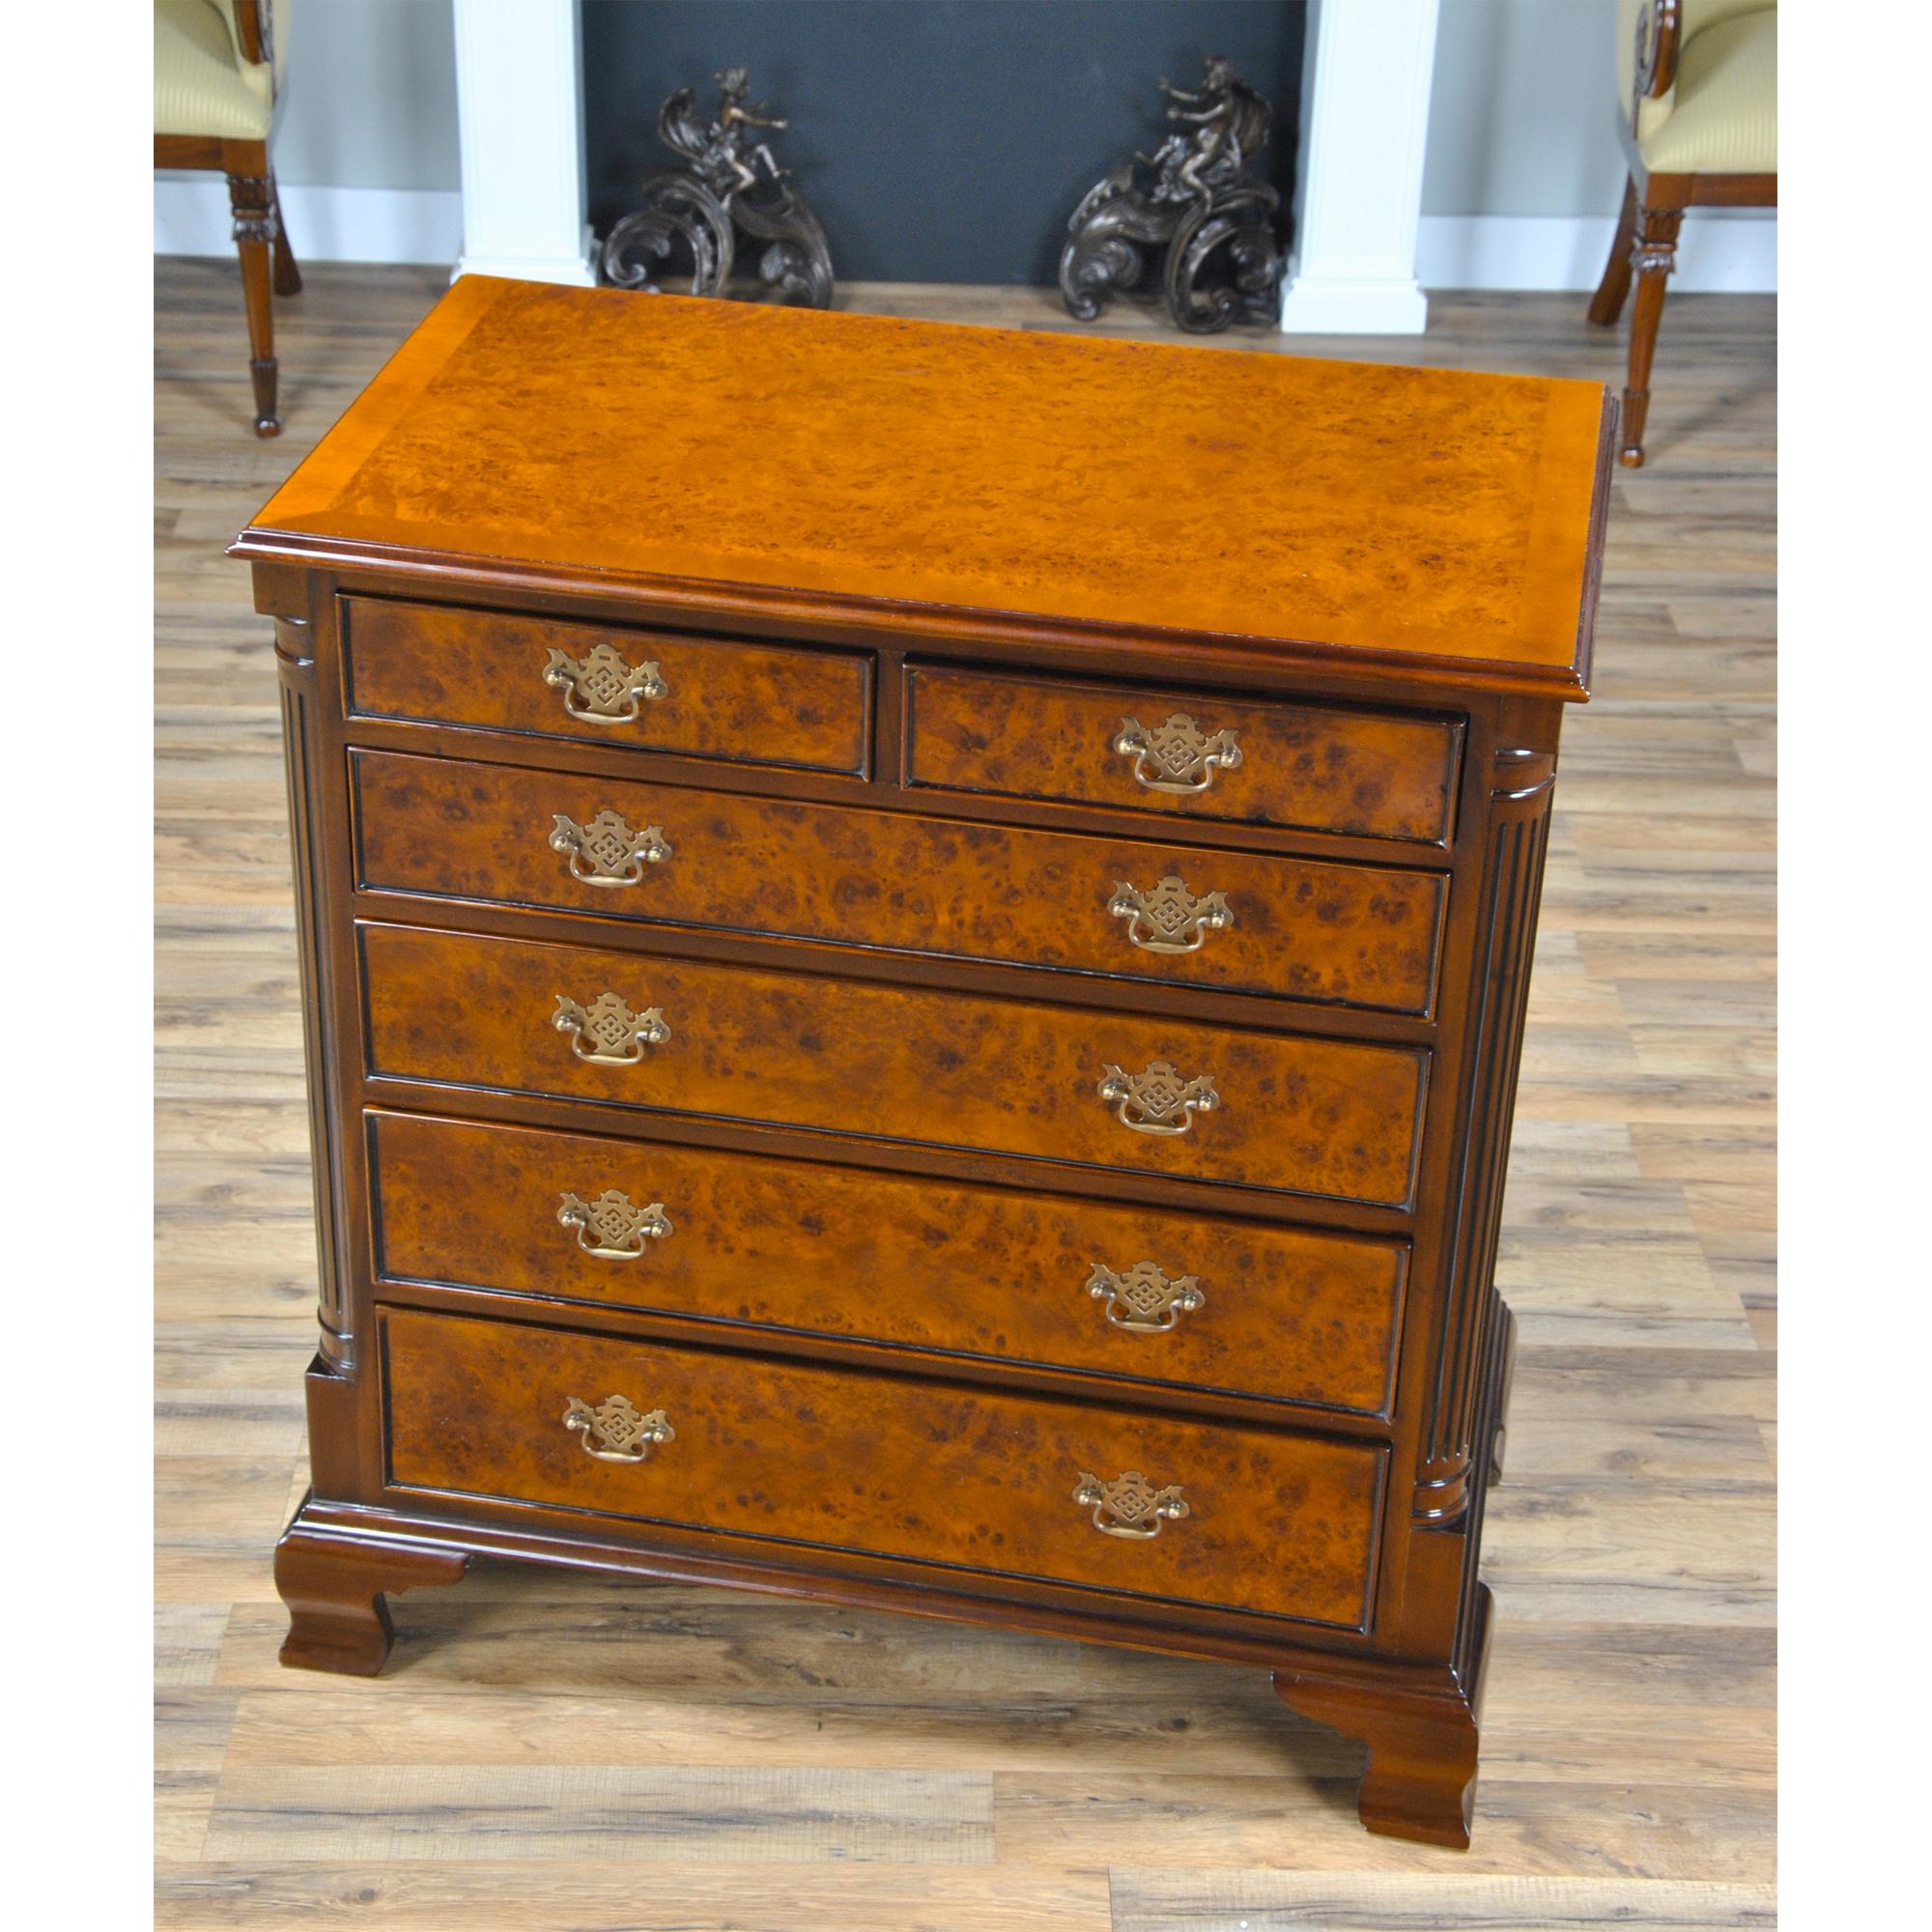 This elegant antique reproduction Burled Chest has superb detailing with bead molding around its four graduated drawers and two uppermost drawers, graceful solid brass escutcheons and drawer pulls, delicately fluted quarter columns and well